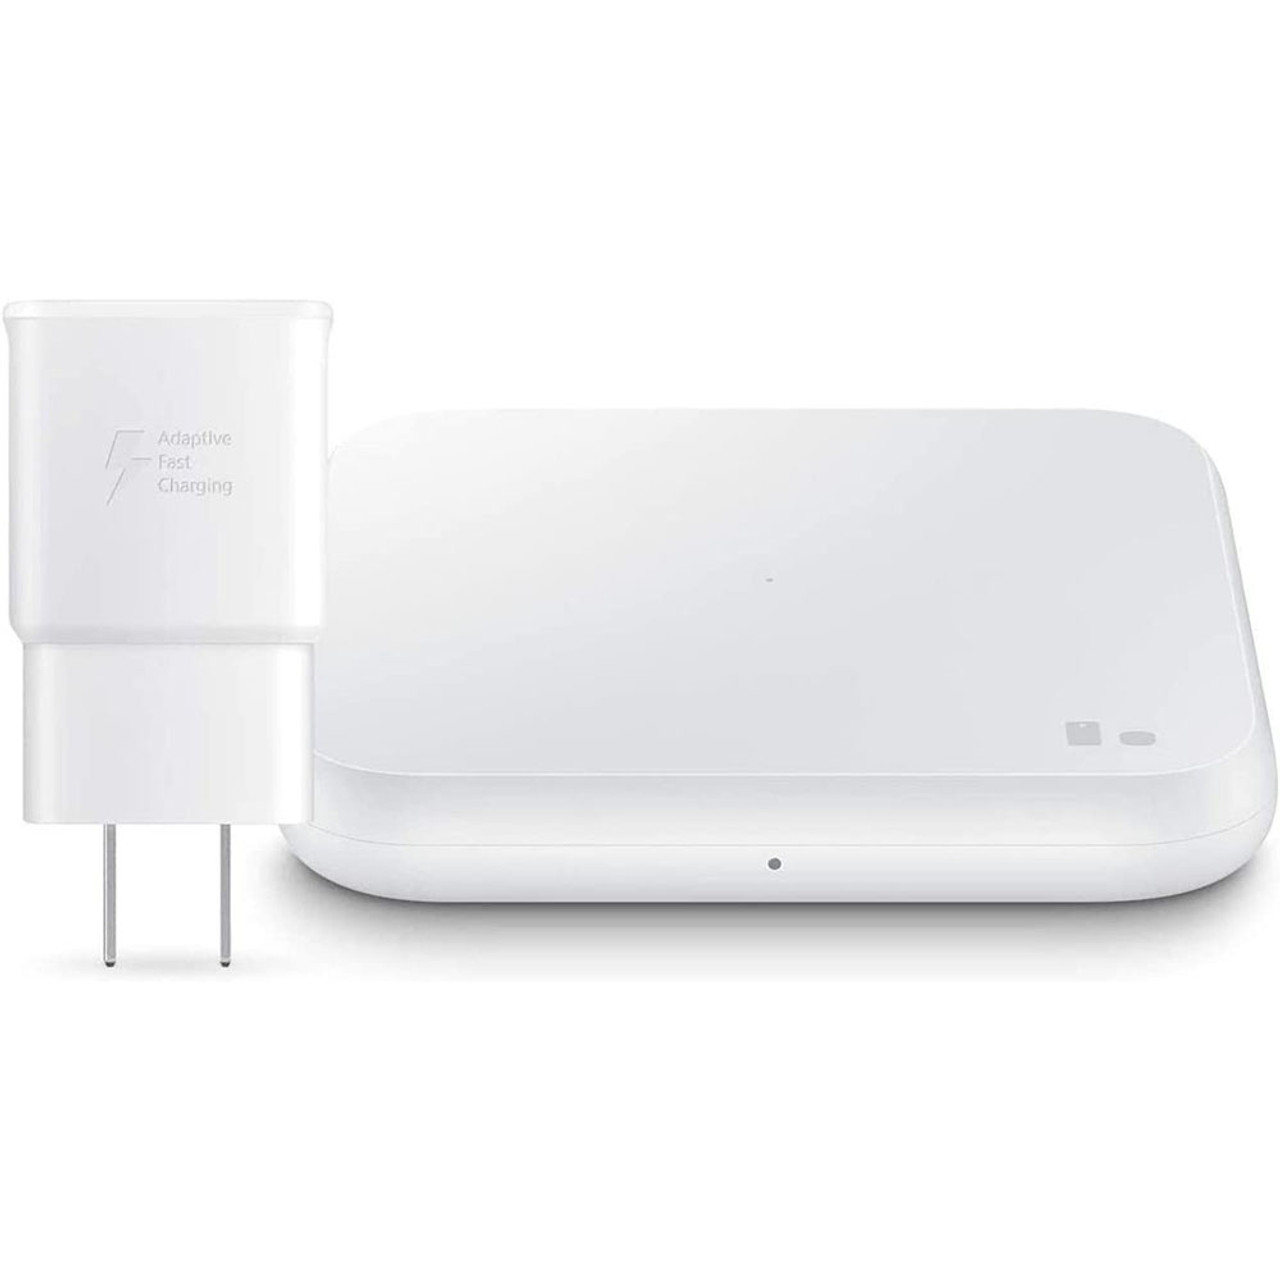 Samsung® Wireless Charger Fast Charge Pad (2021) product image